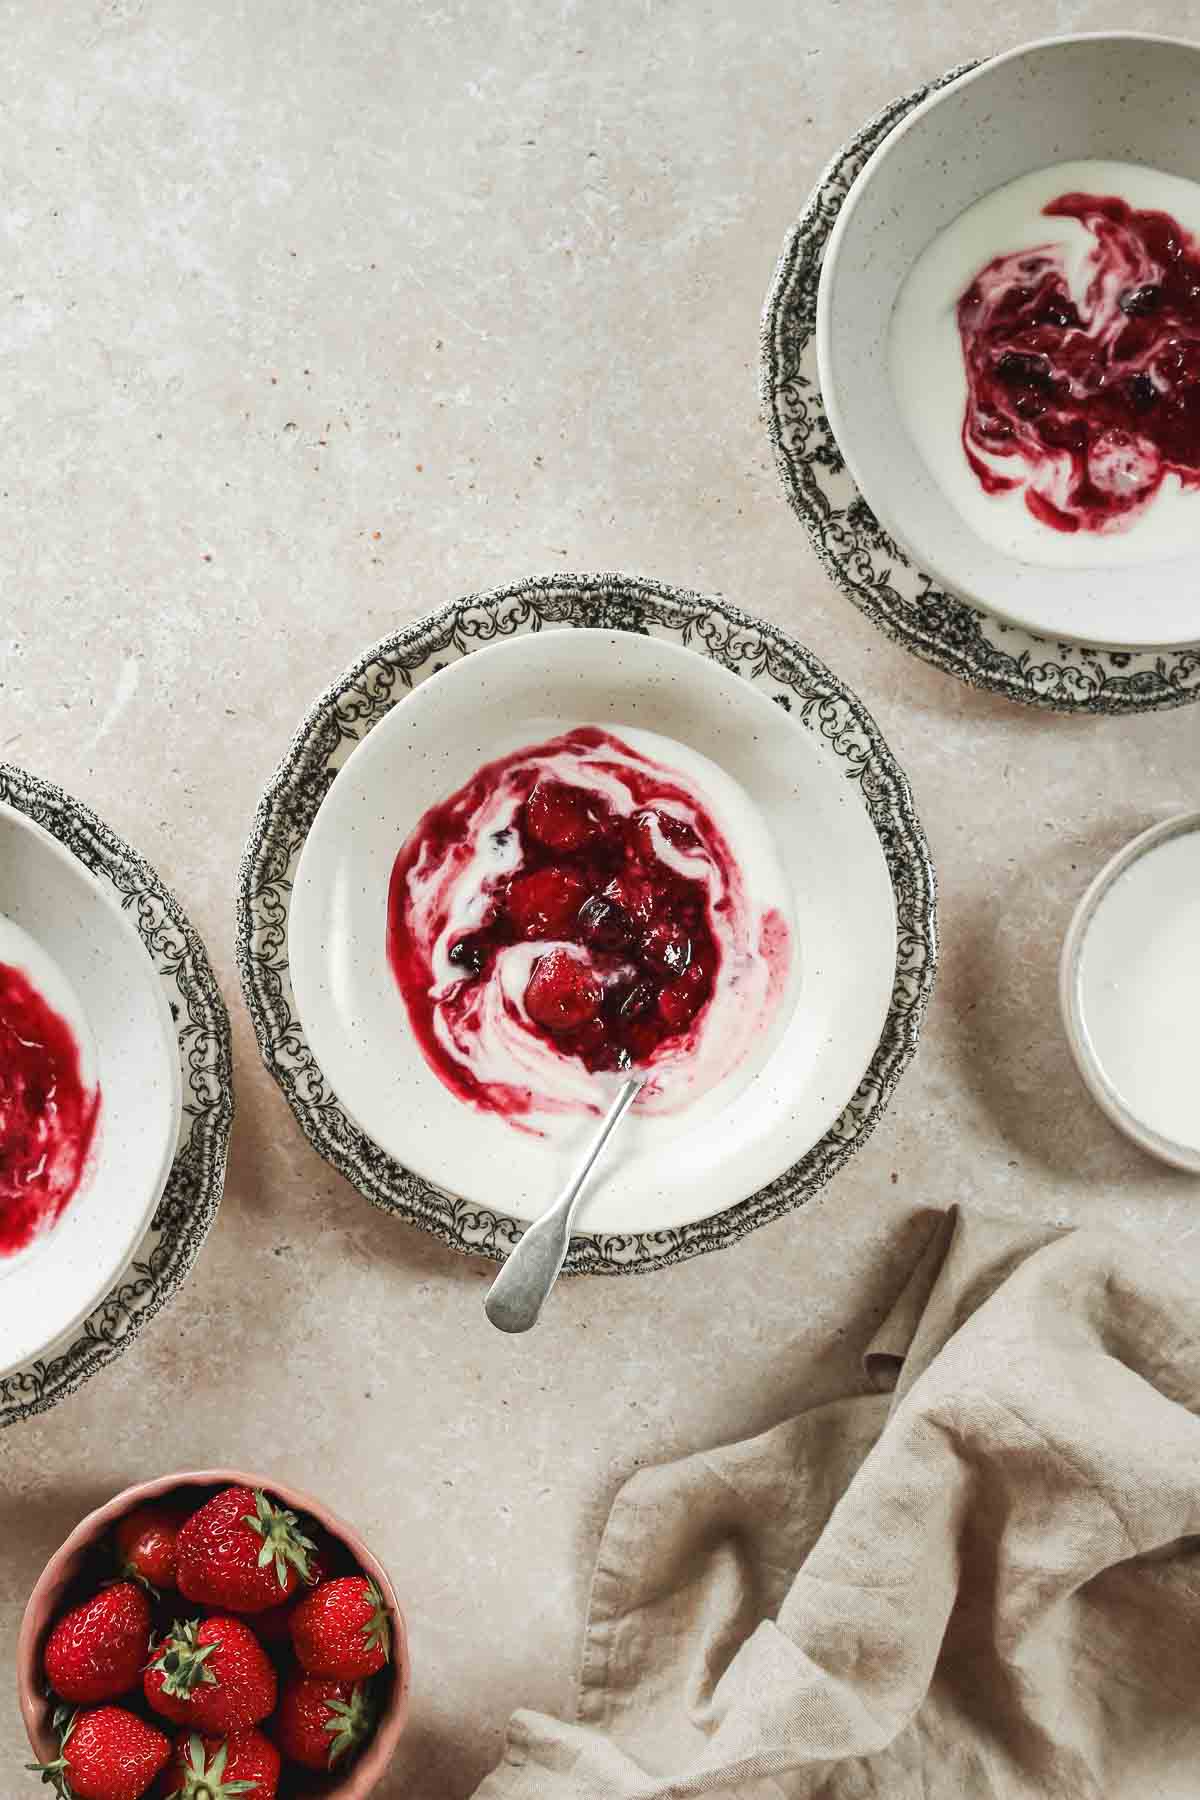 easy mixed berry compote on beige bowls on flower plates with vintage spoon.